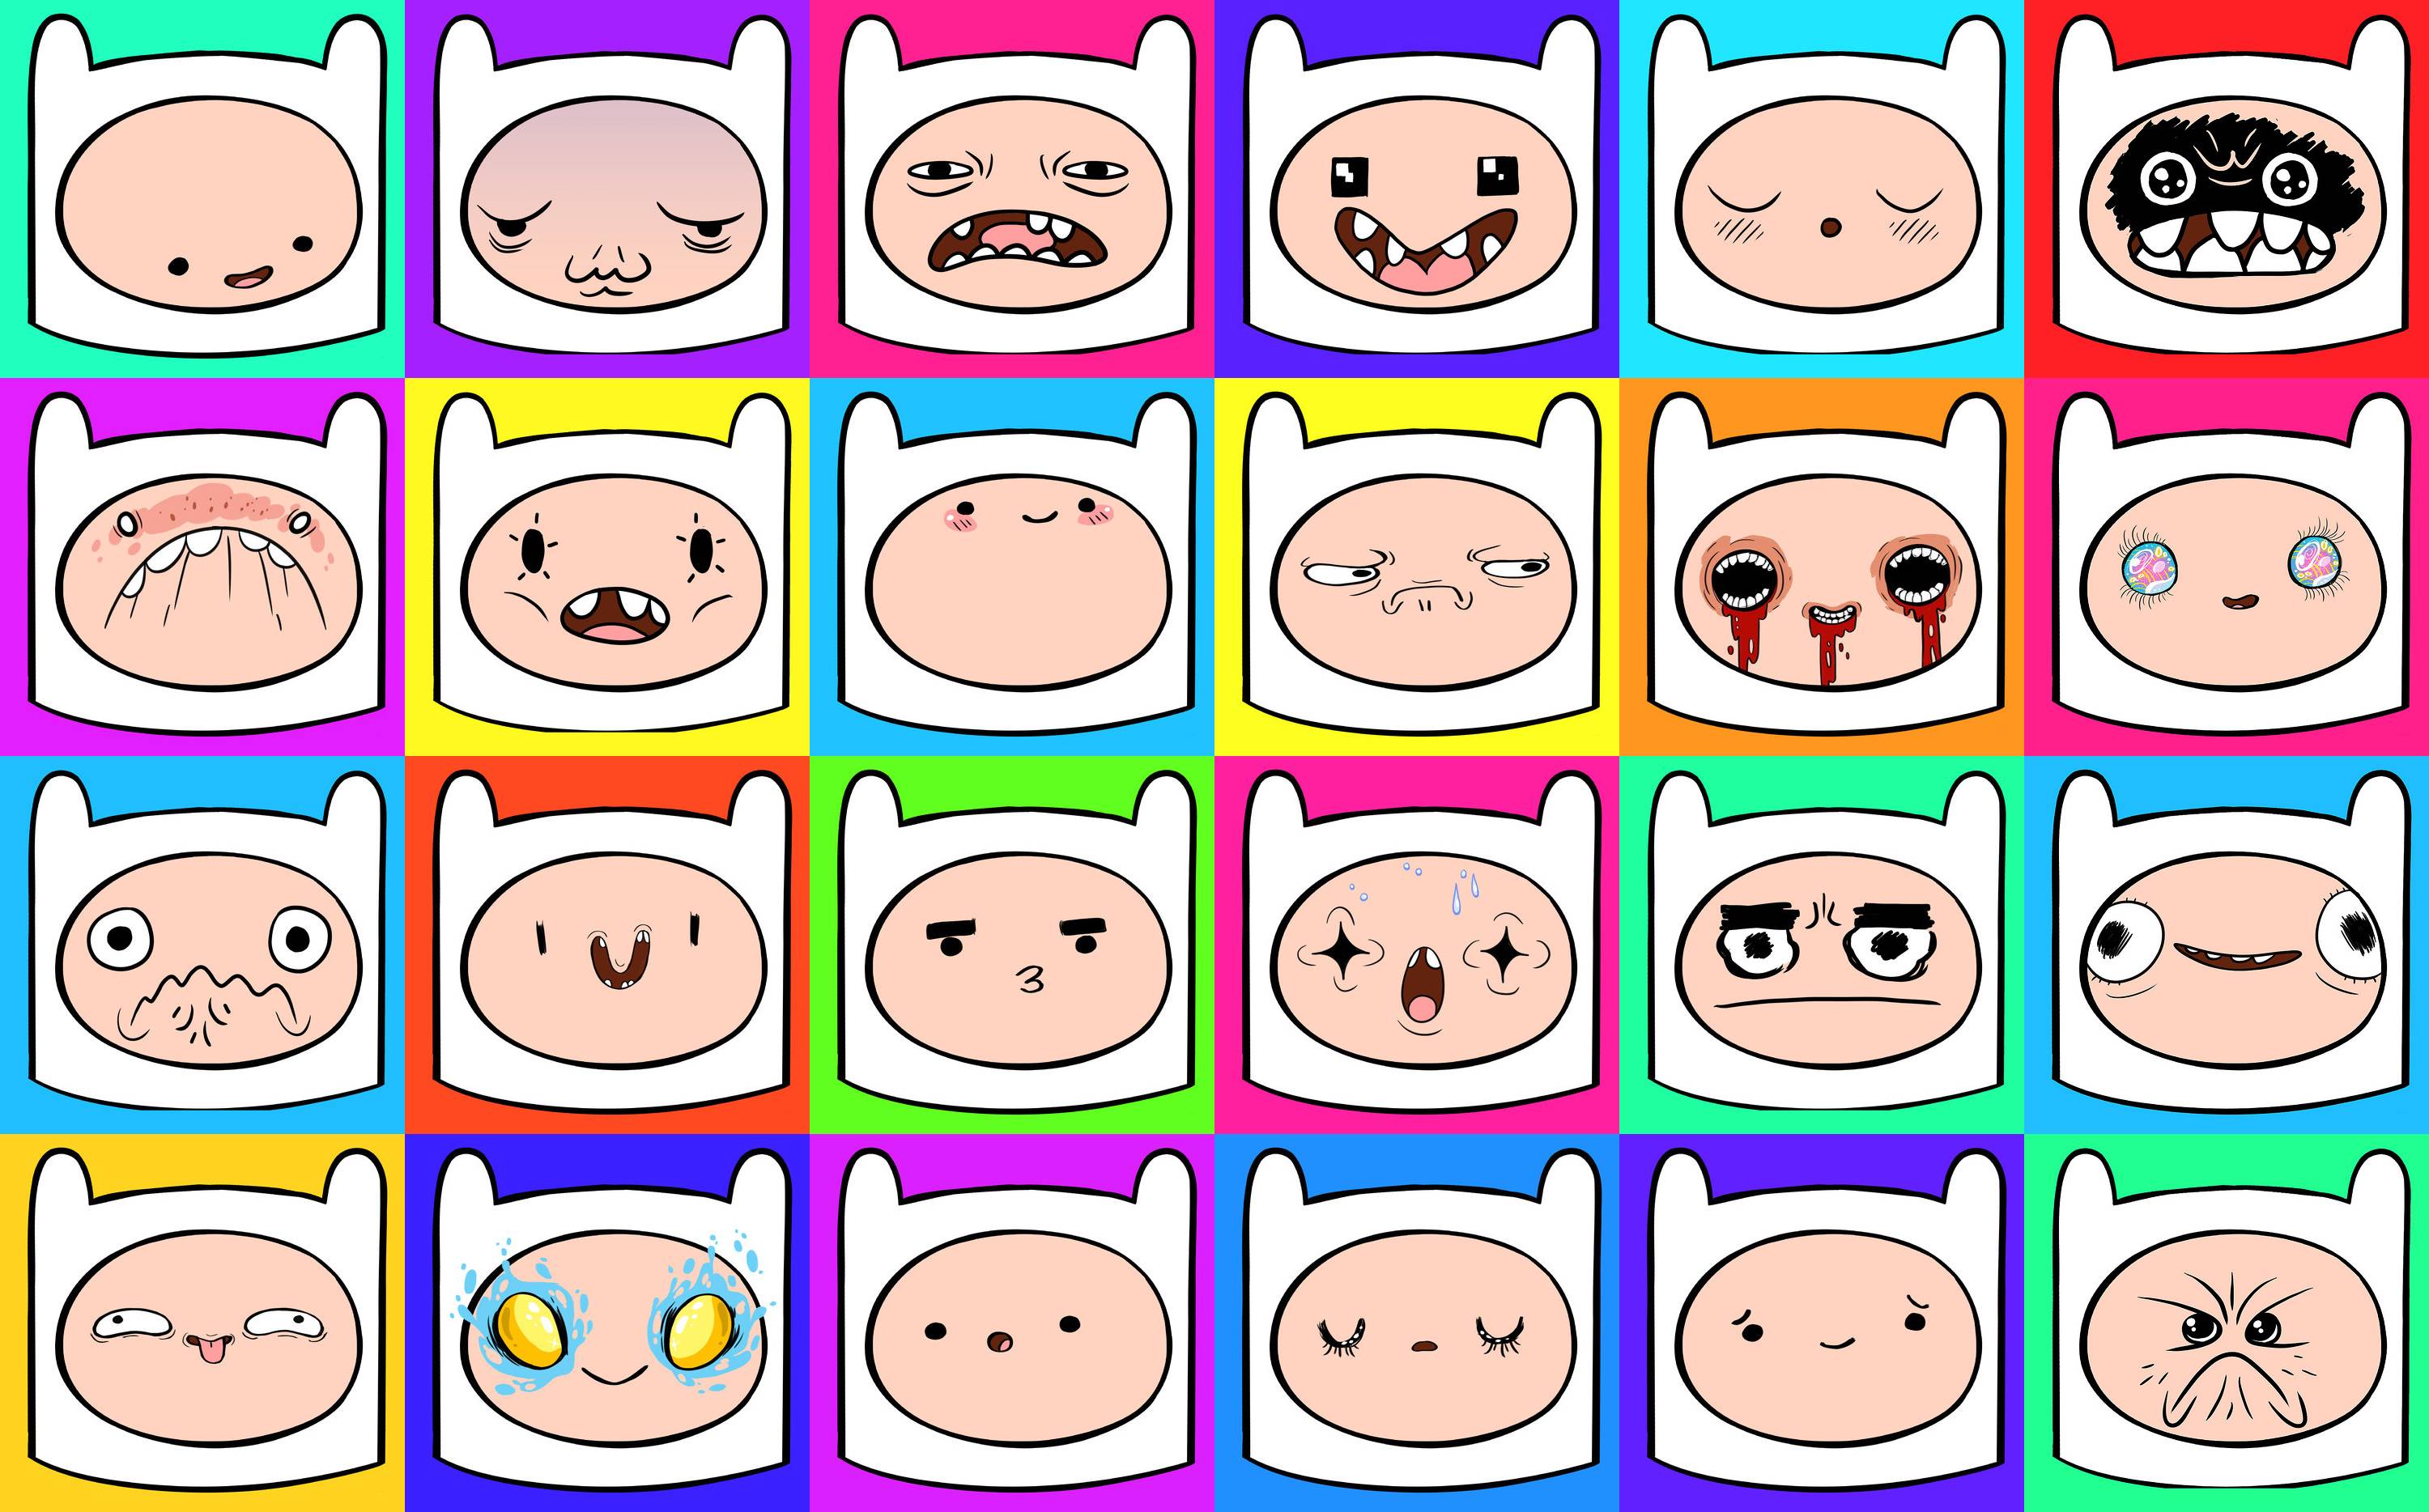 The many faces of Finn. [Wallpaper]